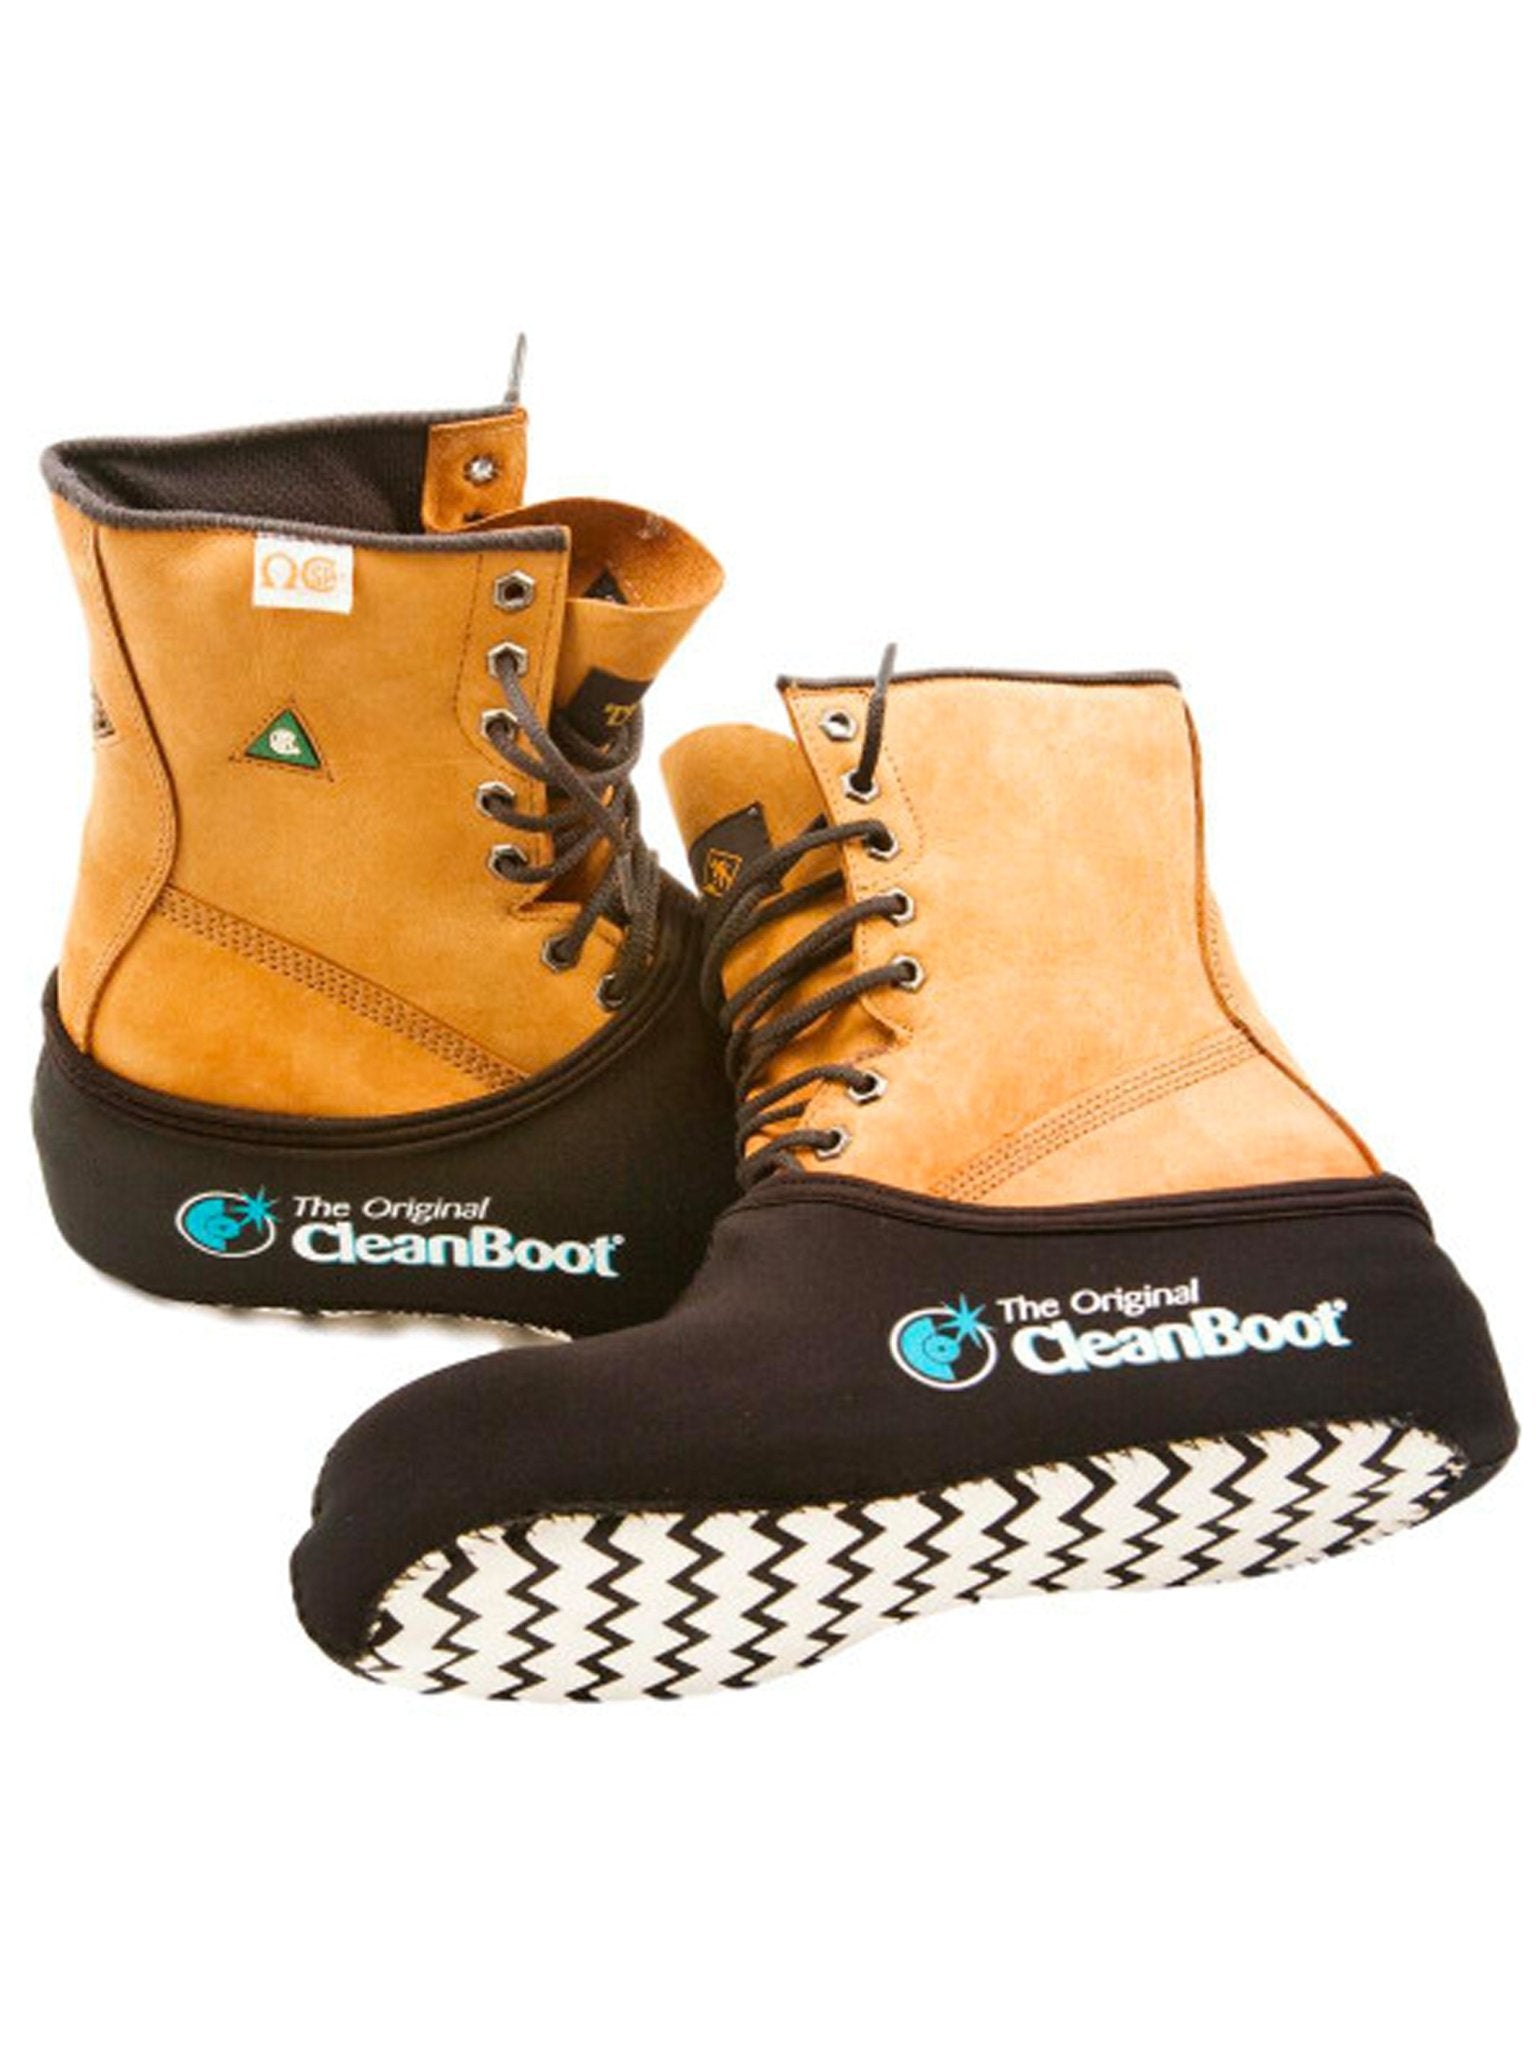 4elementsclothingThe Original CleanBootThe Original CleanBoot ™ – Professional, Stretchable design with a grippy sole, Protect your floor.Shoes5060976970177